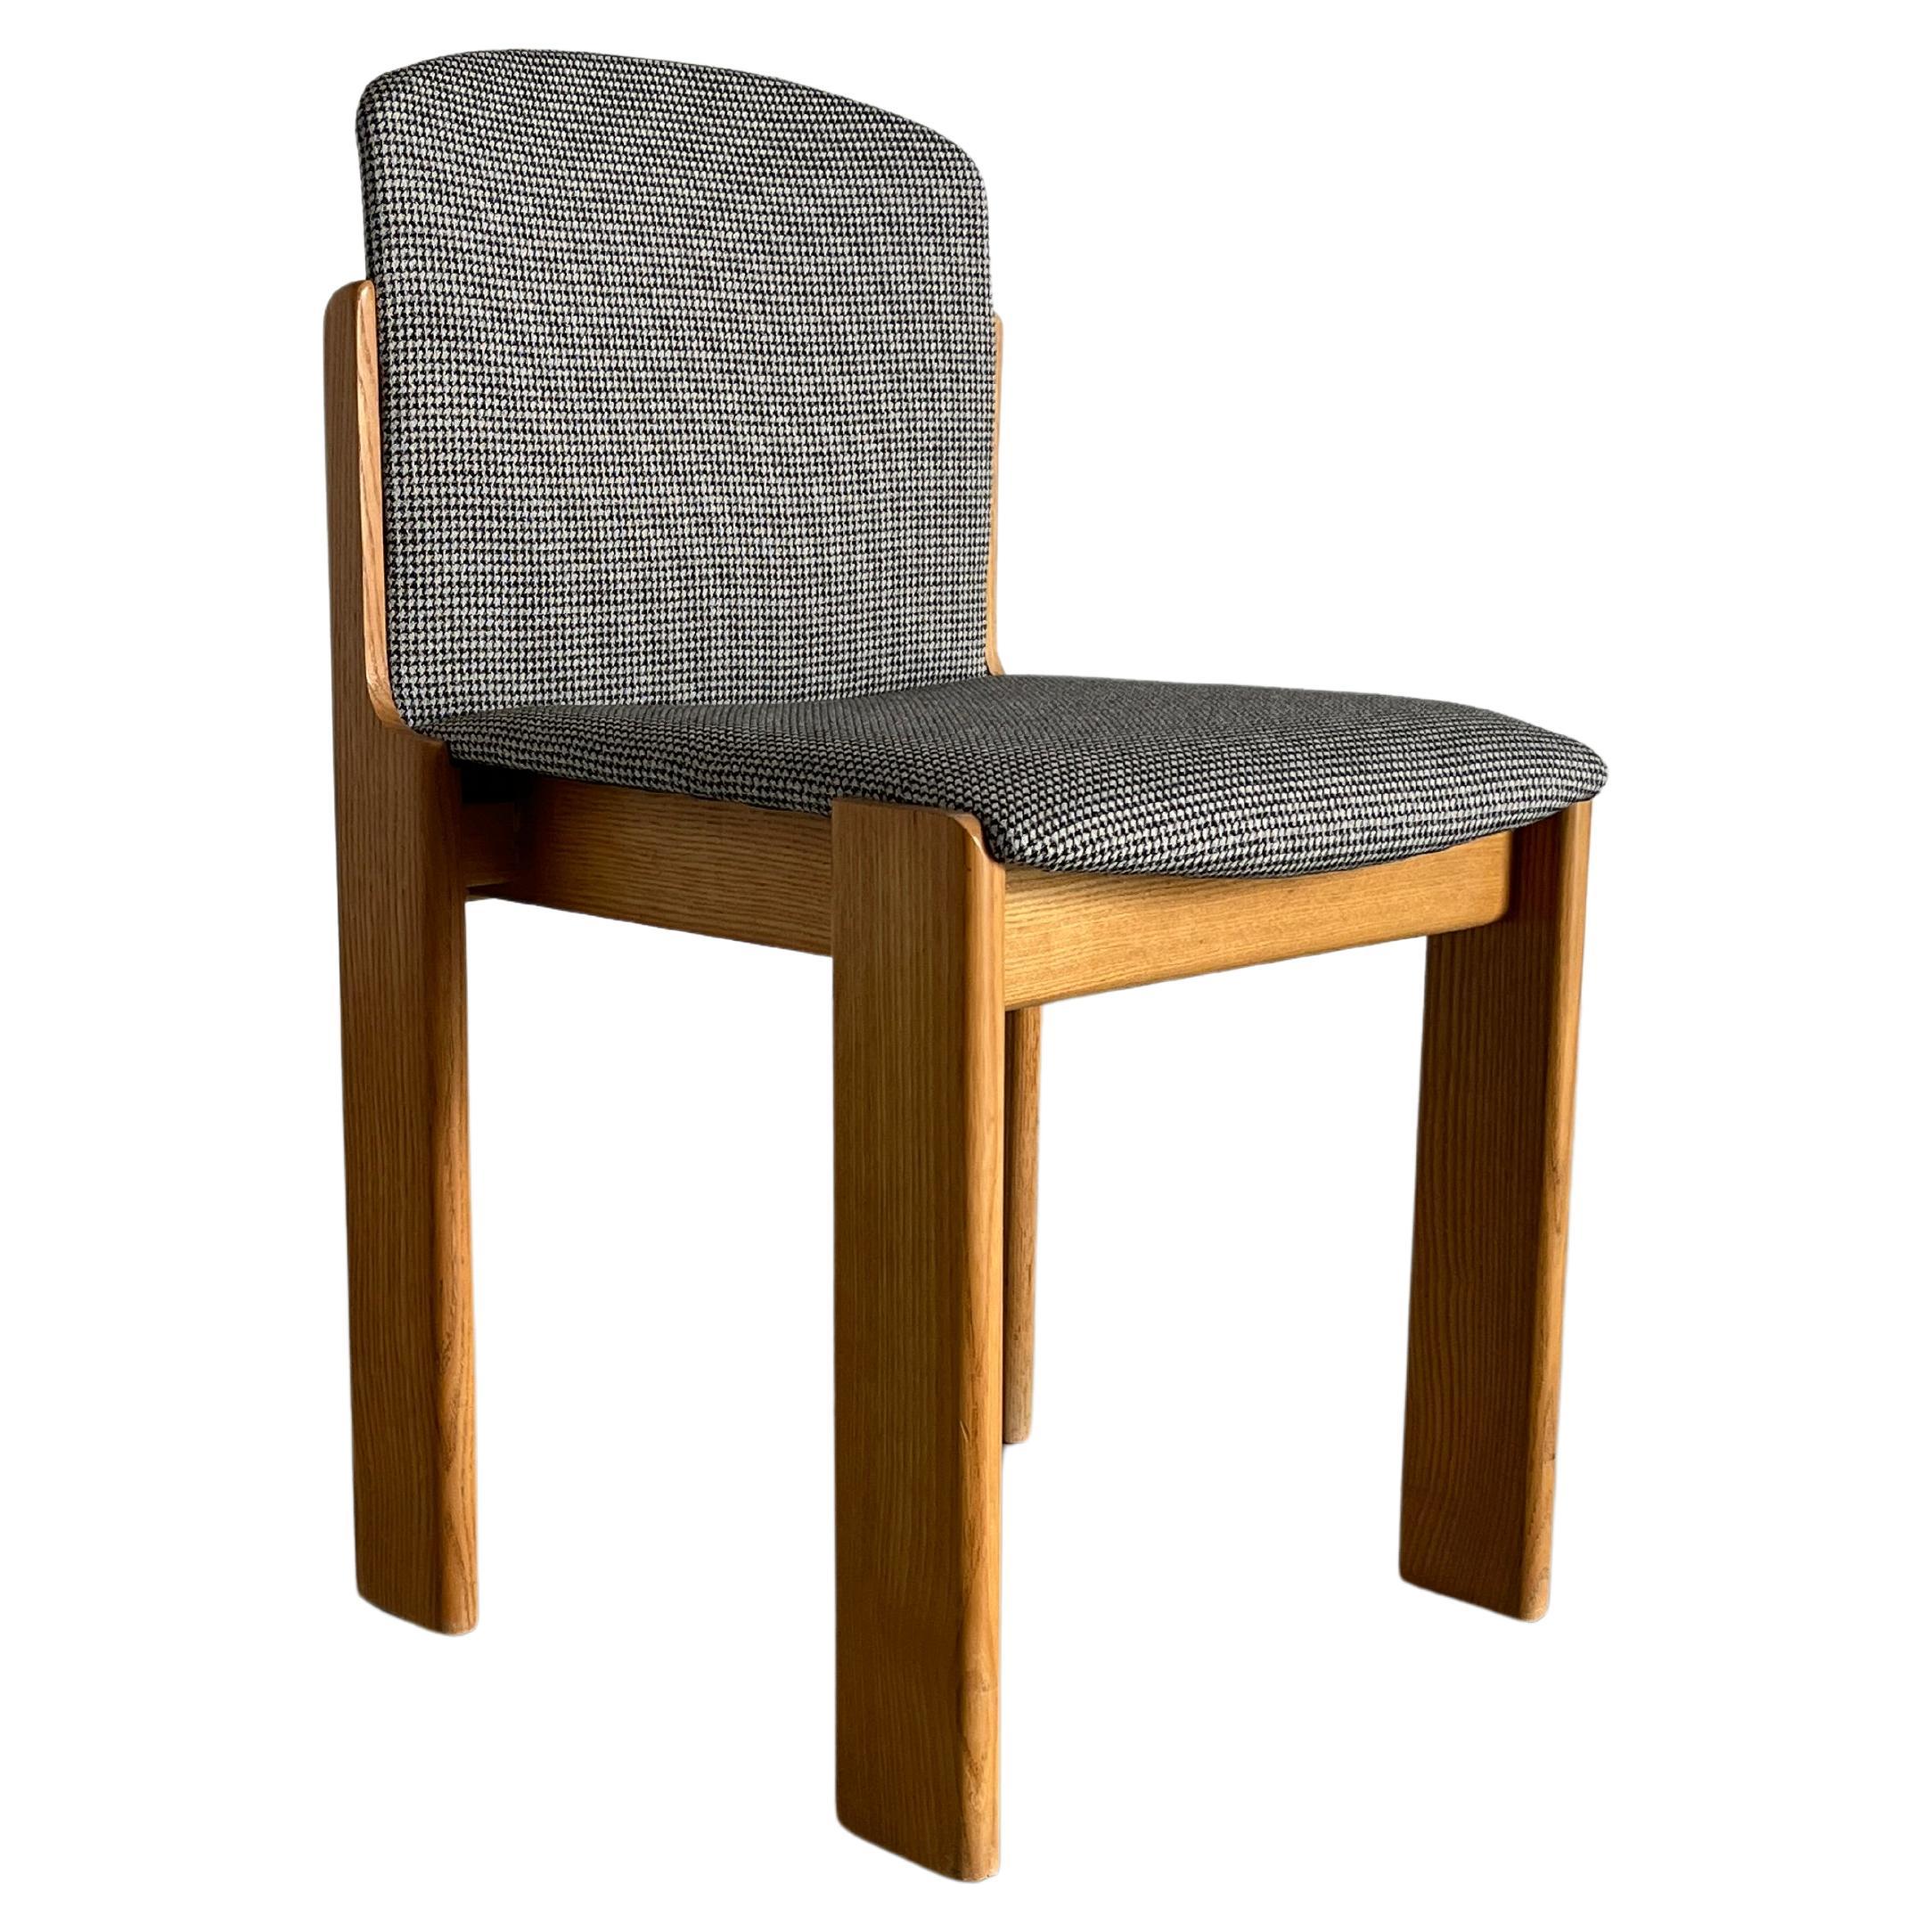 Vintage Mid-Century Dining Chair in Style of Afra, Tobia Scarpa for Cassina, 70s